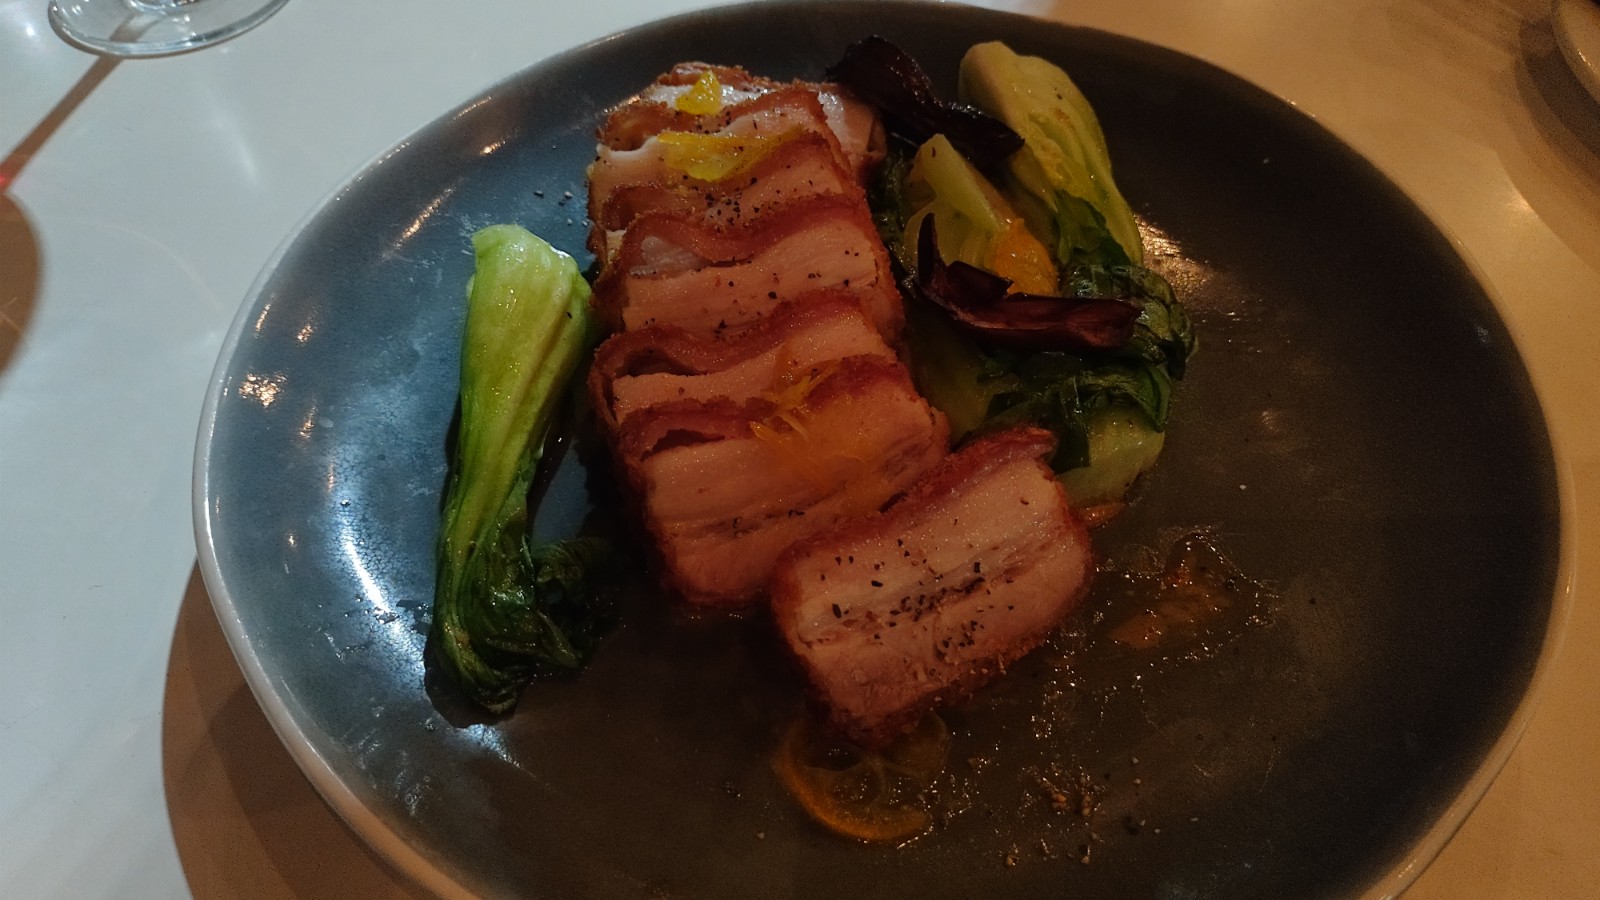 Picture of the Fried Pork Belly dish.